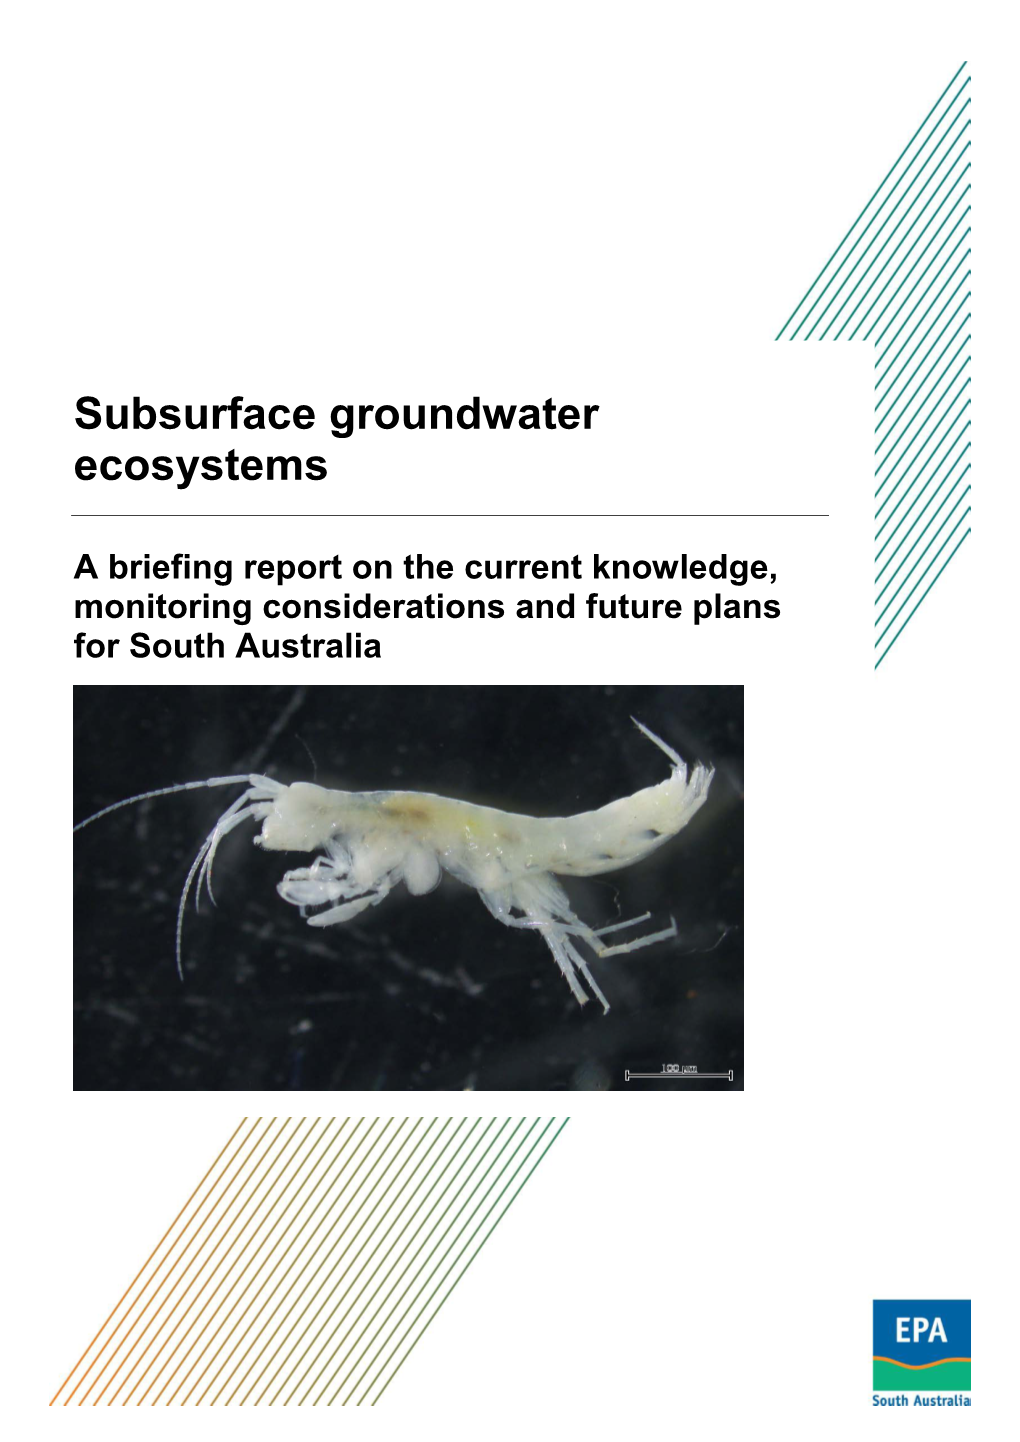 Report on Subsurface Groundwater Ecosystems